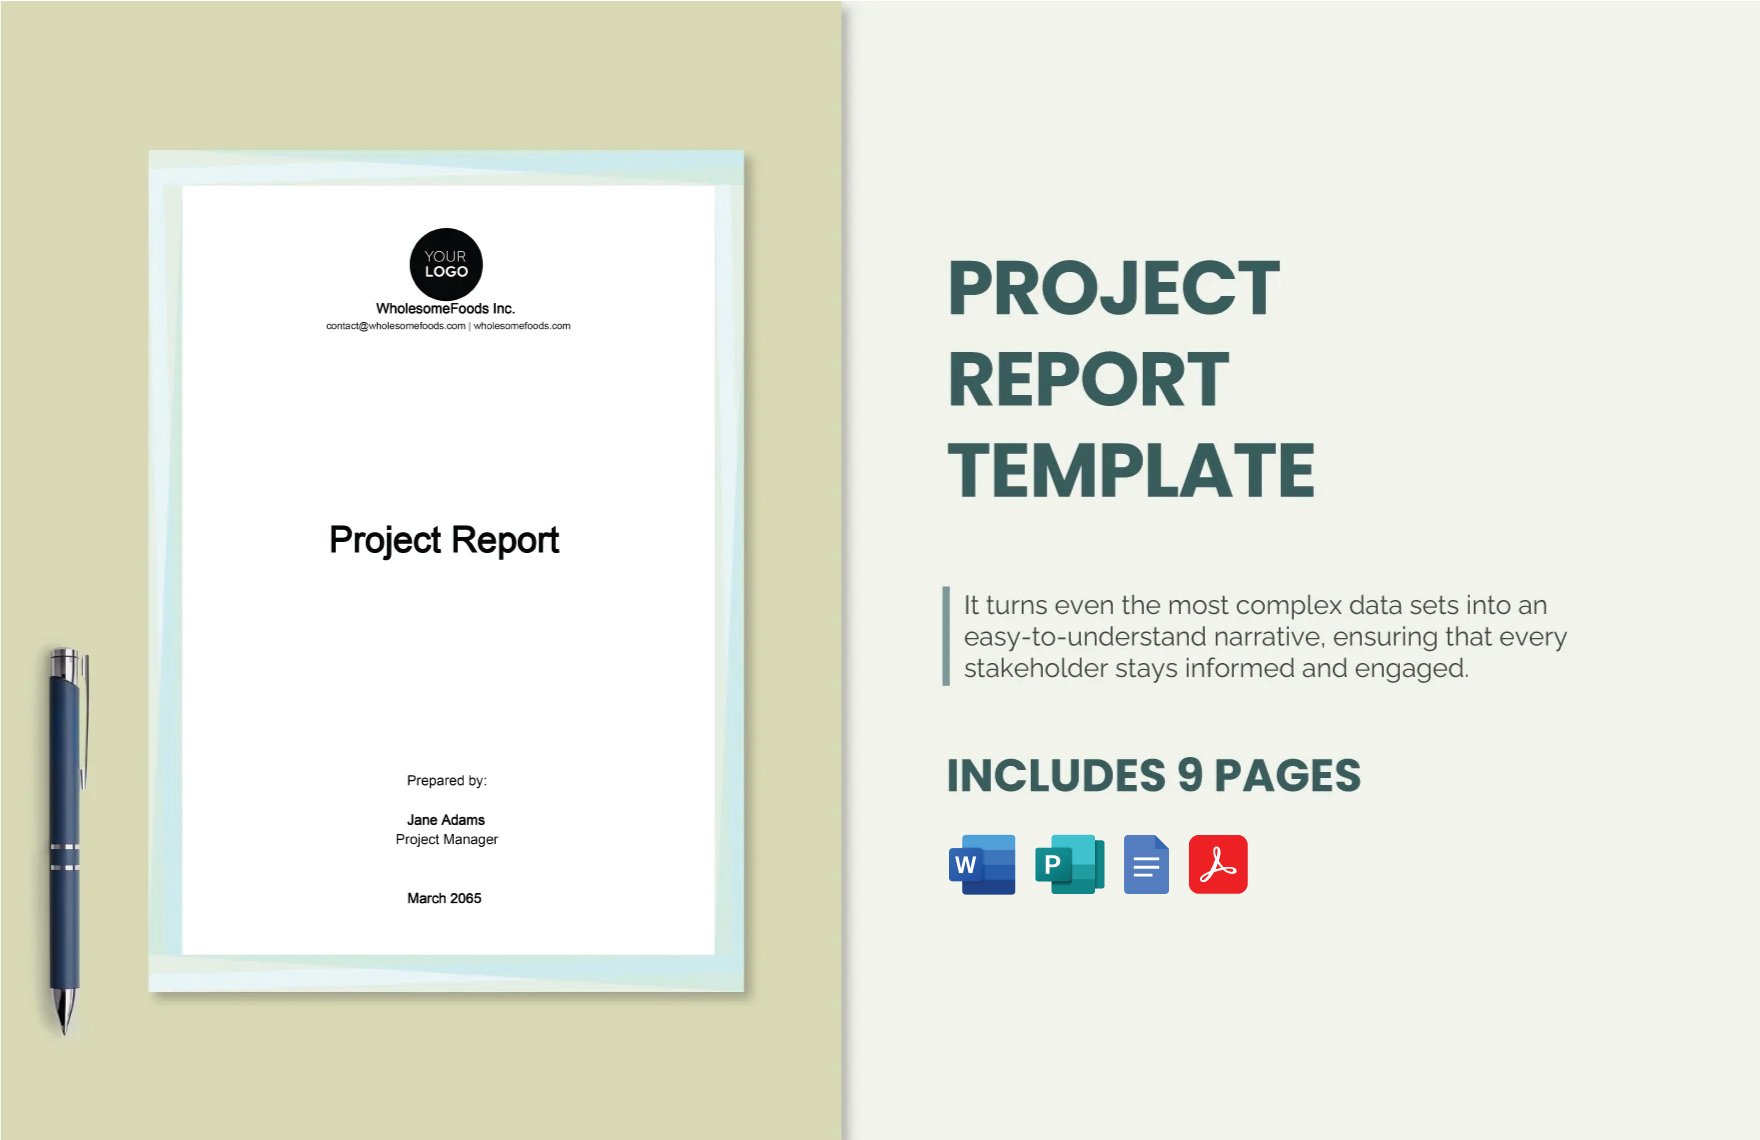 Project Report Template in Word, Google Docs, PDF, Publisher